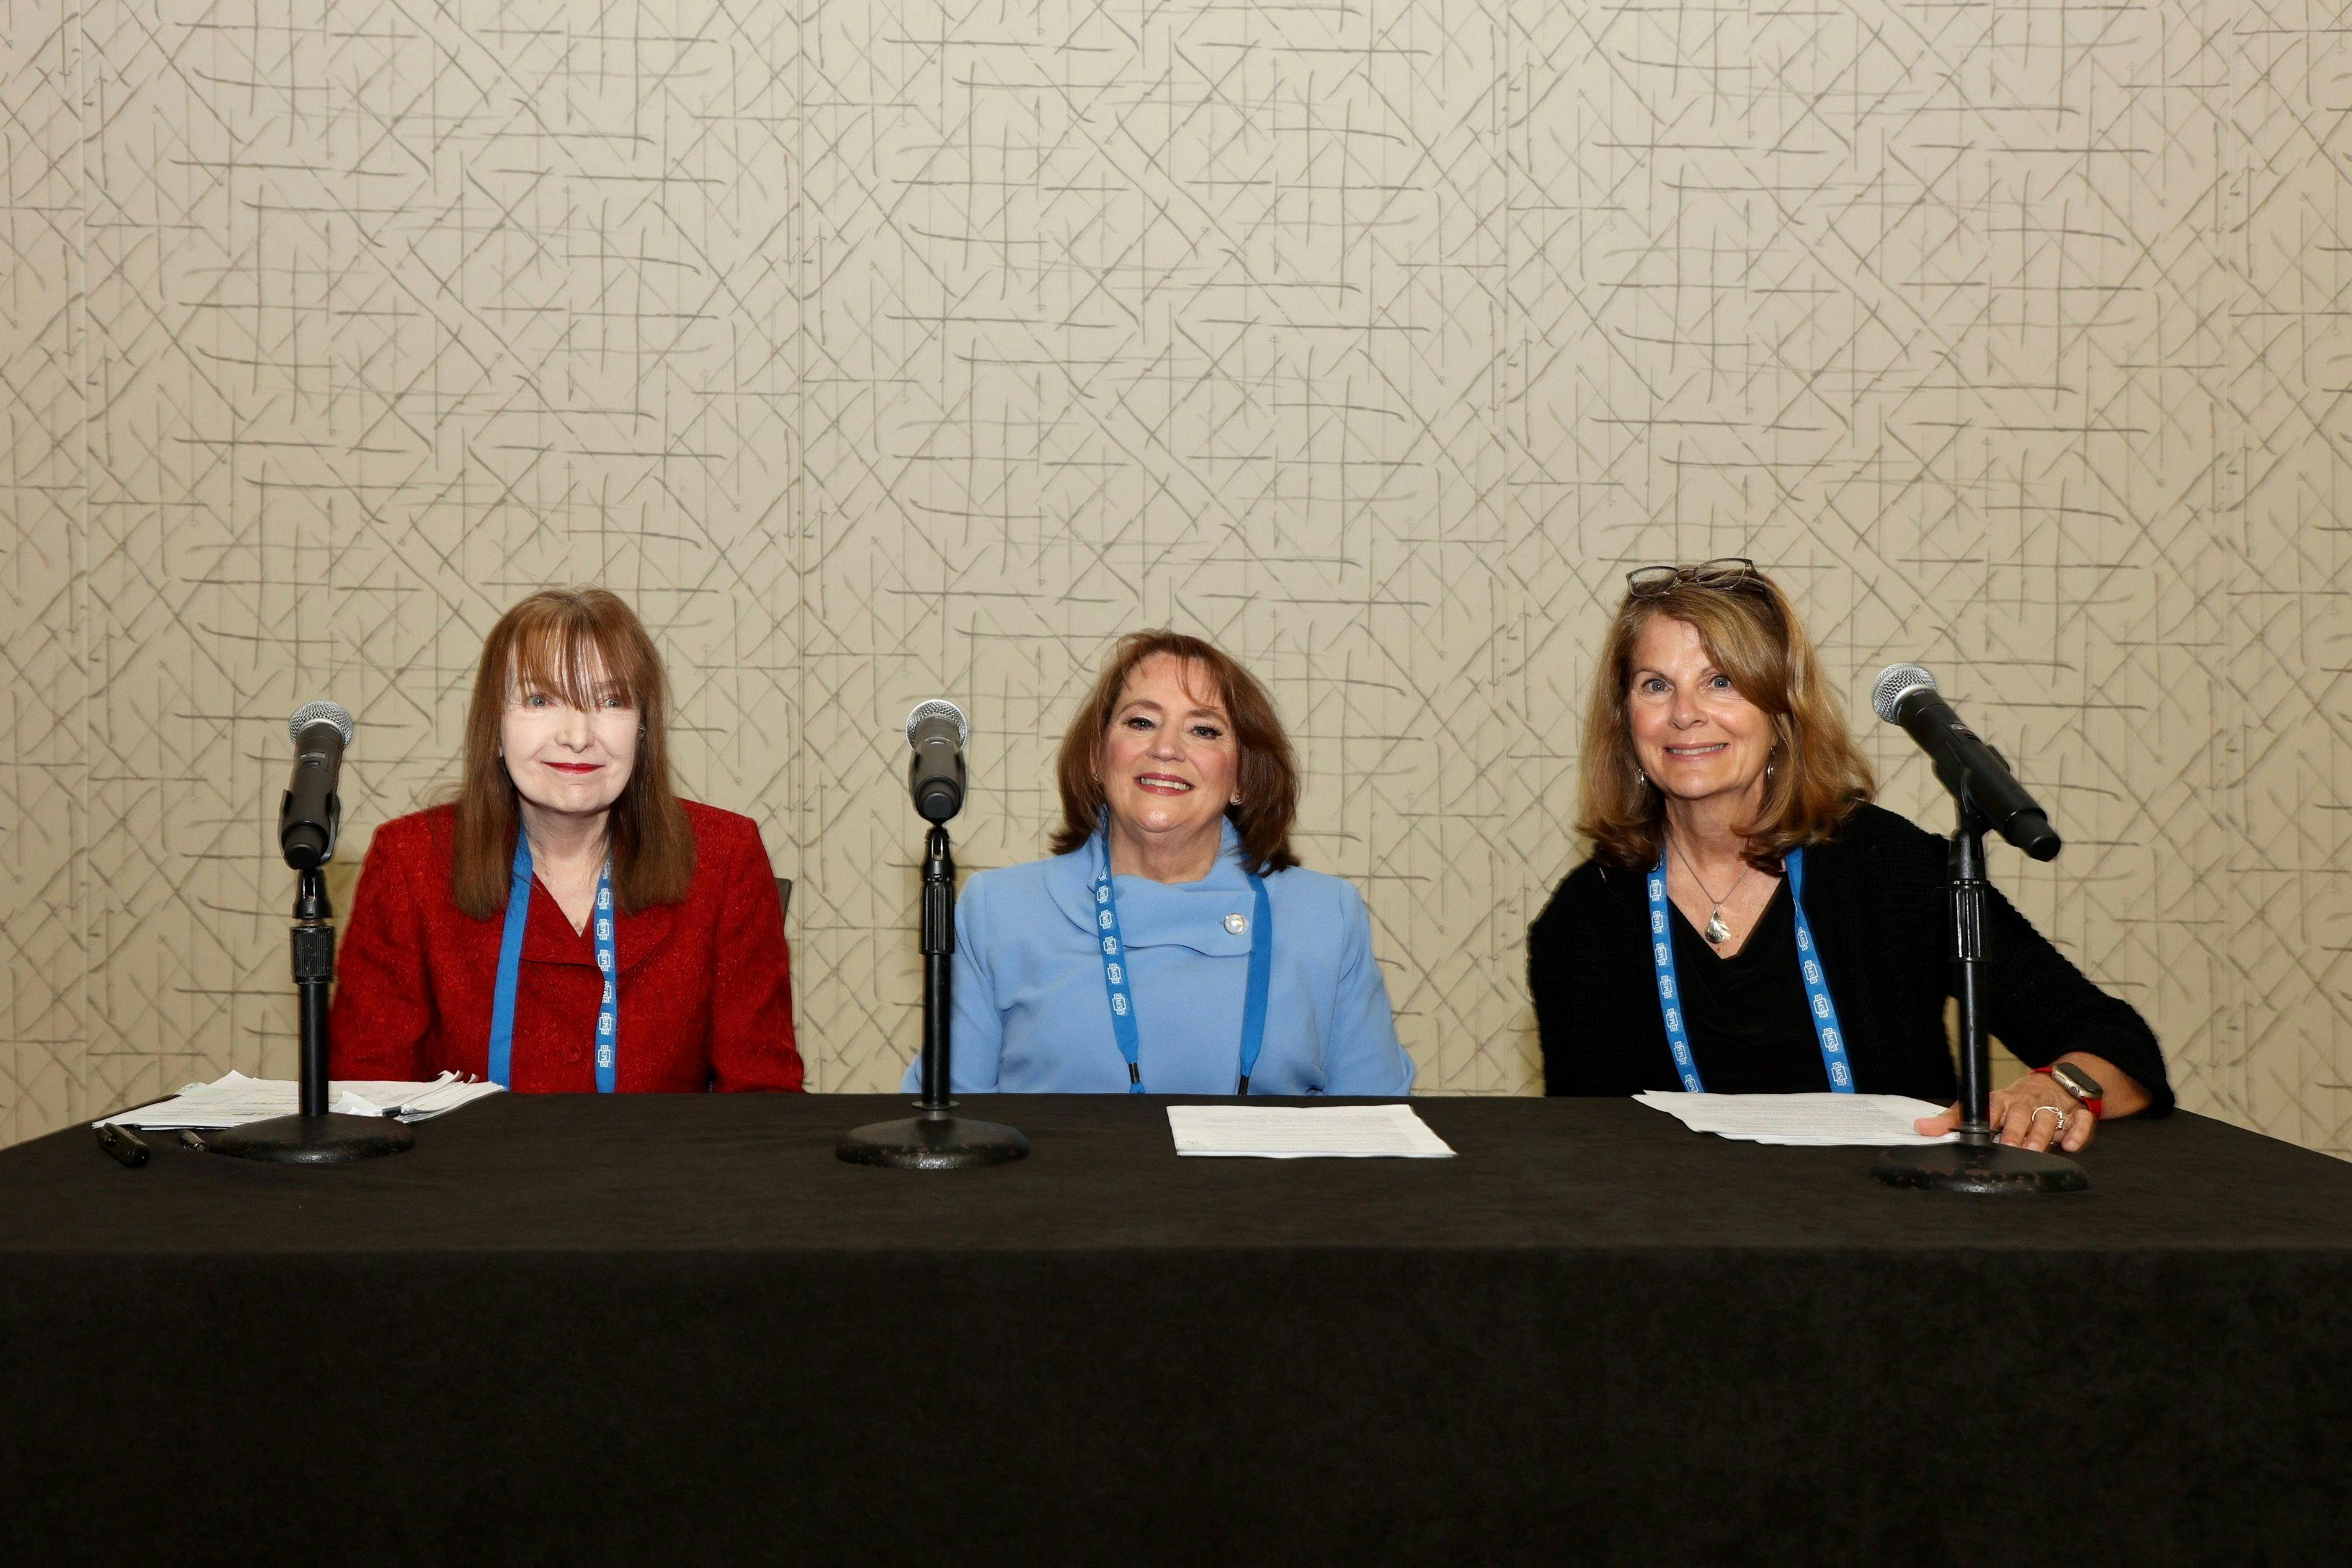 From left: Patricia Coyle, MD; Patricia Melville, NP-C, CCRC, MSCN; and Marijean Buhse, PhD, NP-BC, MSCN.
Image courtesy: Shmulik Almany